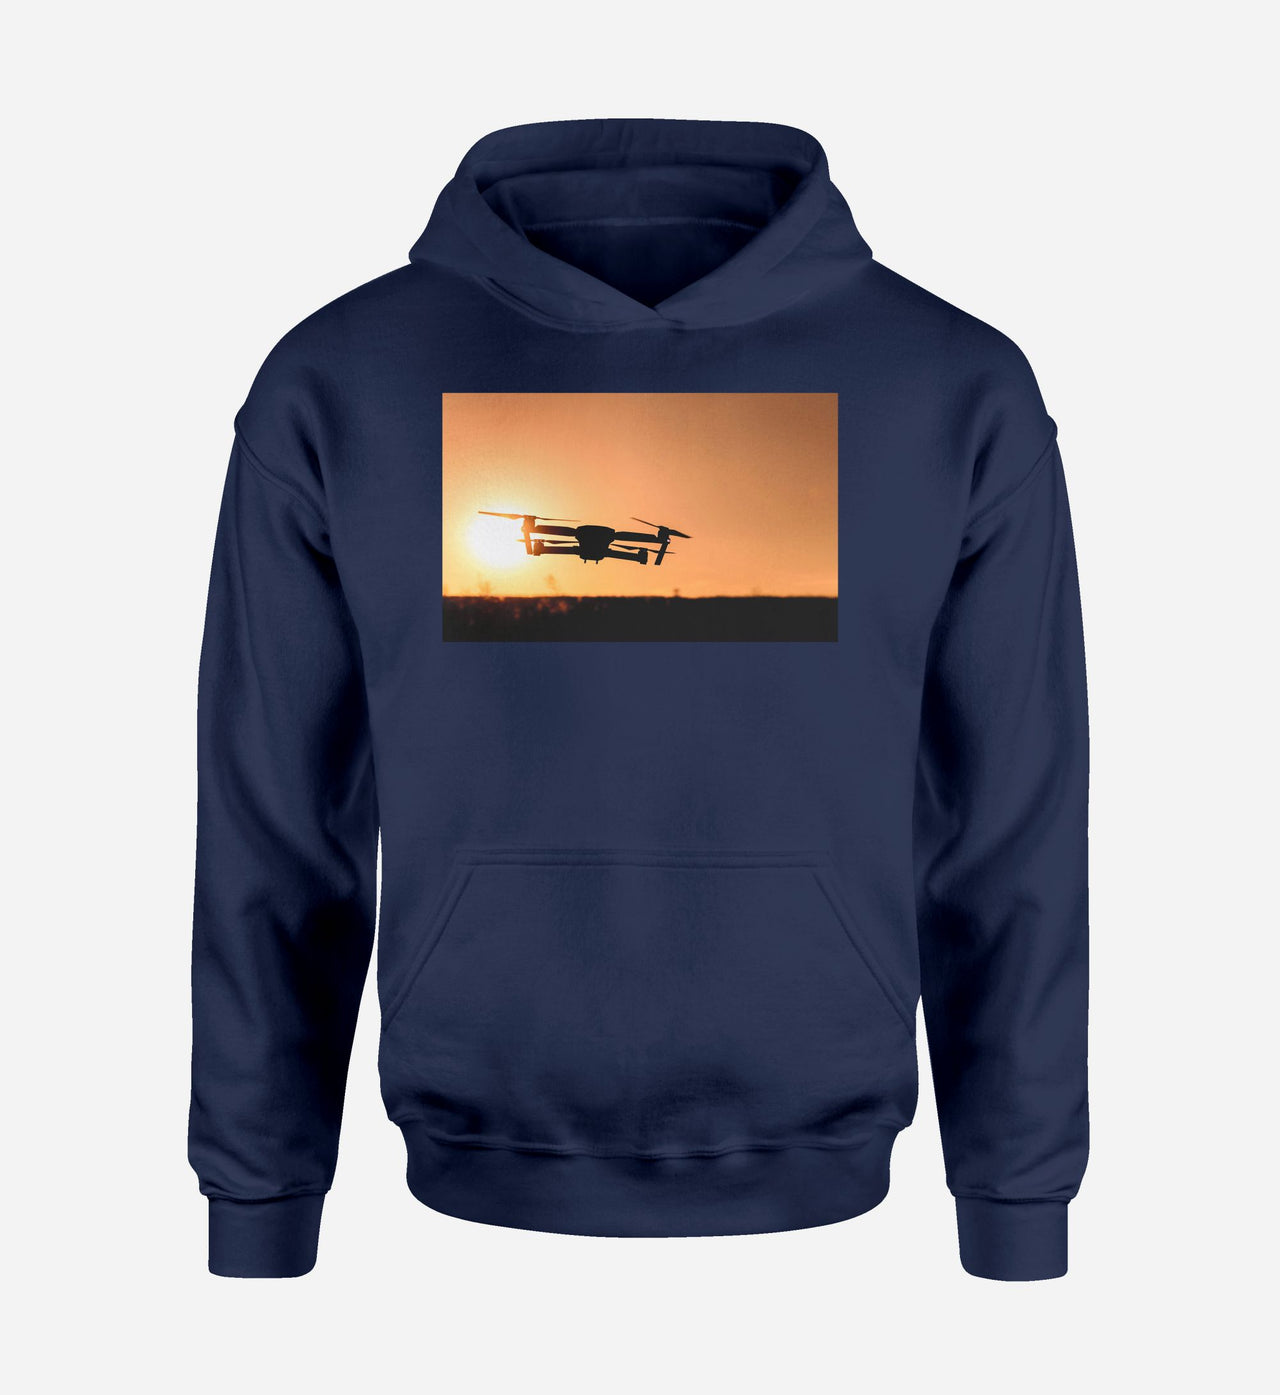 Amazing Drone in Sunset Designed Hoodies